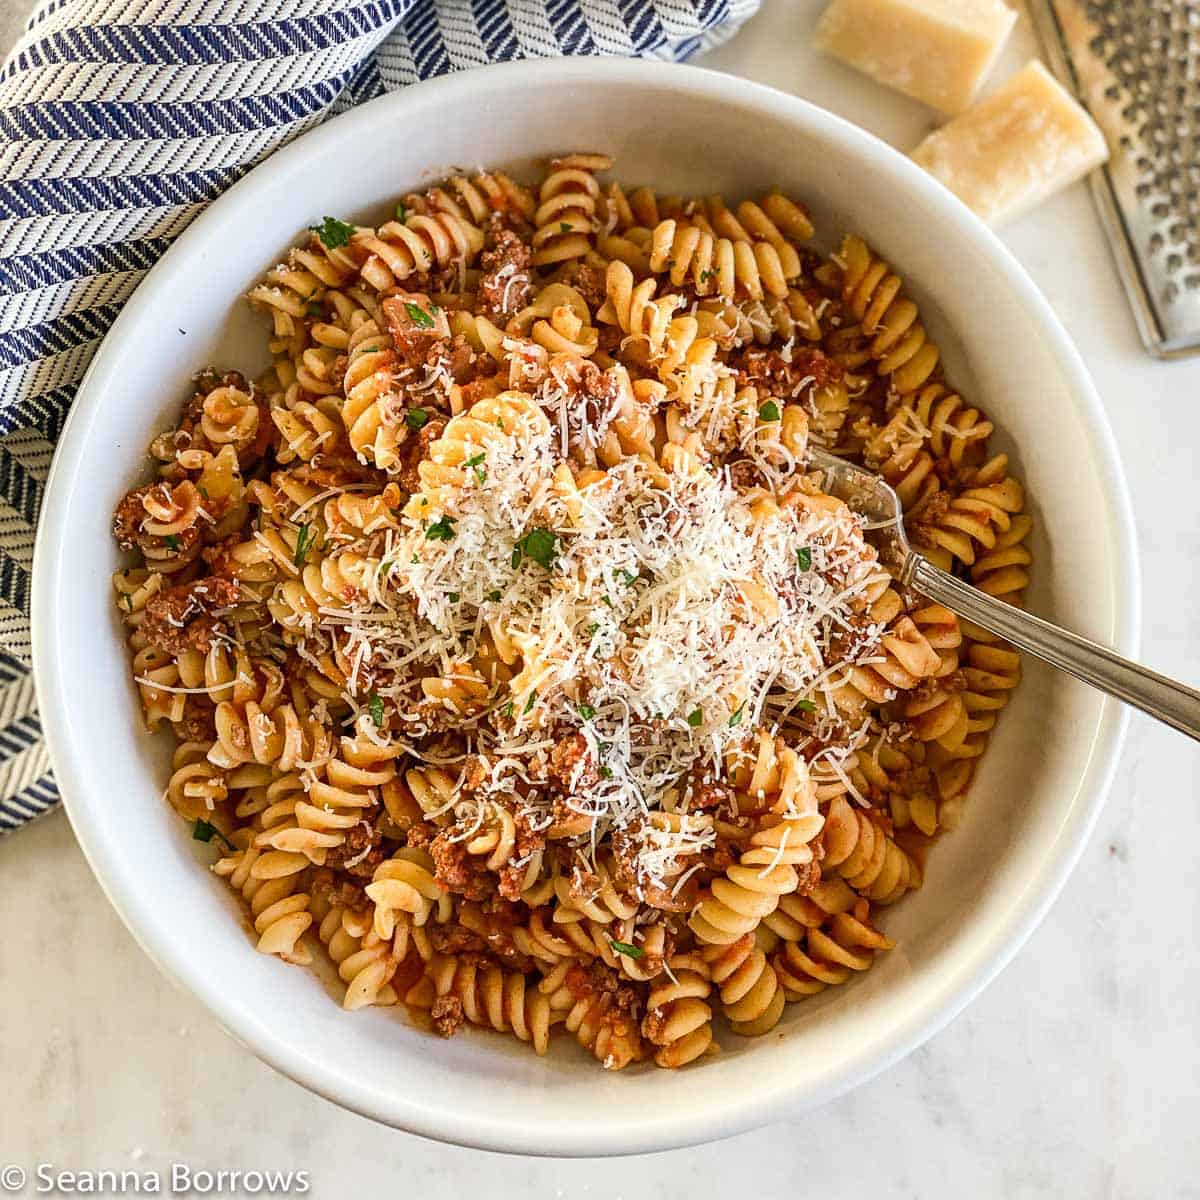 Image of Rotini pasta dish. Easy dinner option made with ground bison and red tomato sauce. Served with grated Parmigiano-Reggiano.